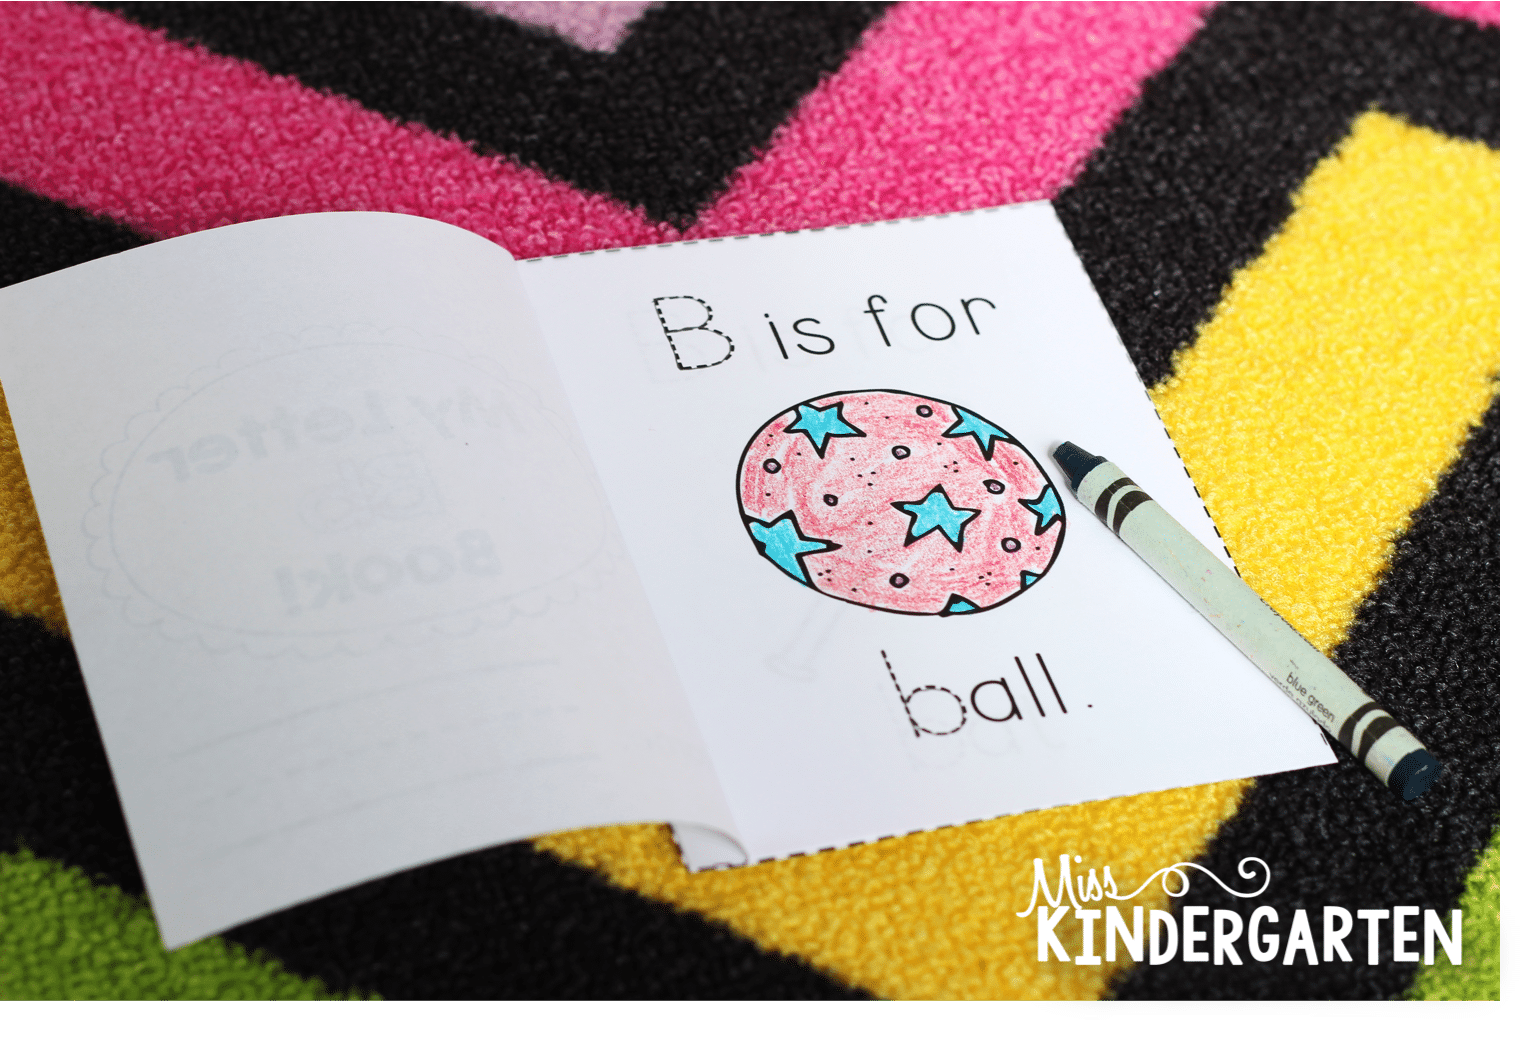 A printable mini-book is open to a page that says "B is for Ball" with a picture of a ball, colored in crayon.